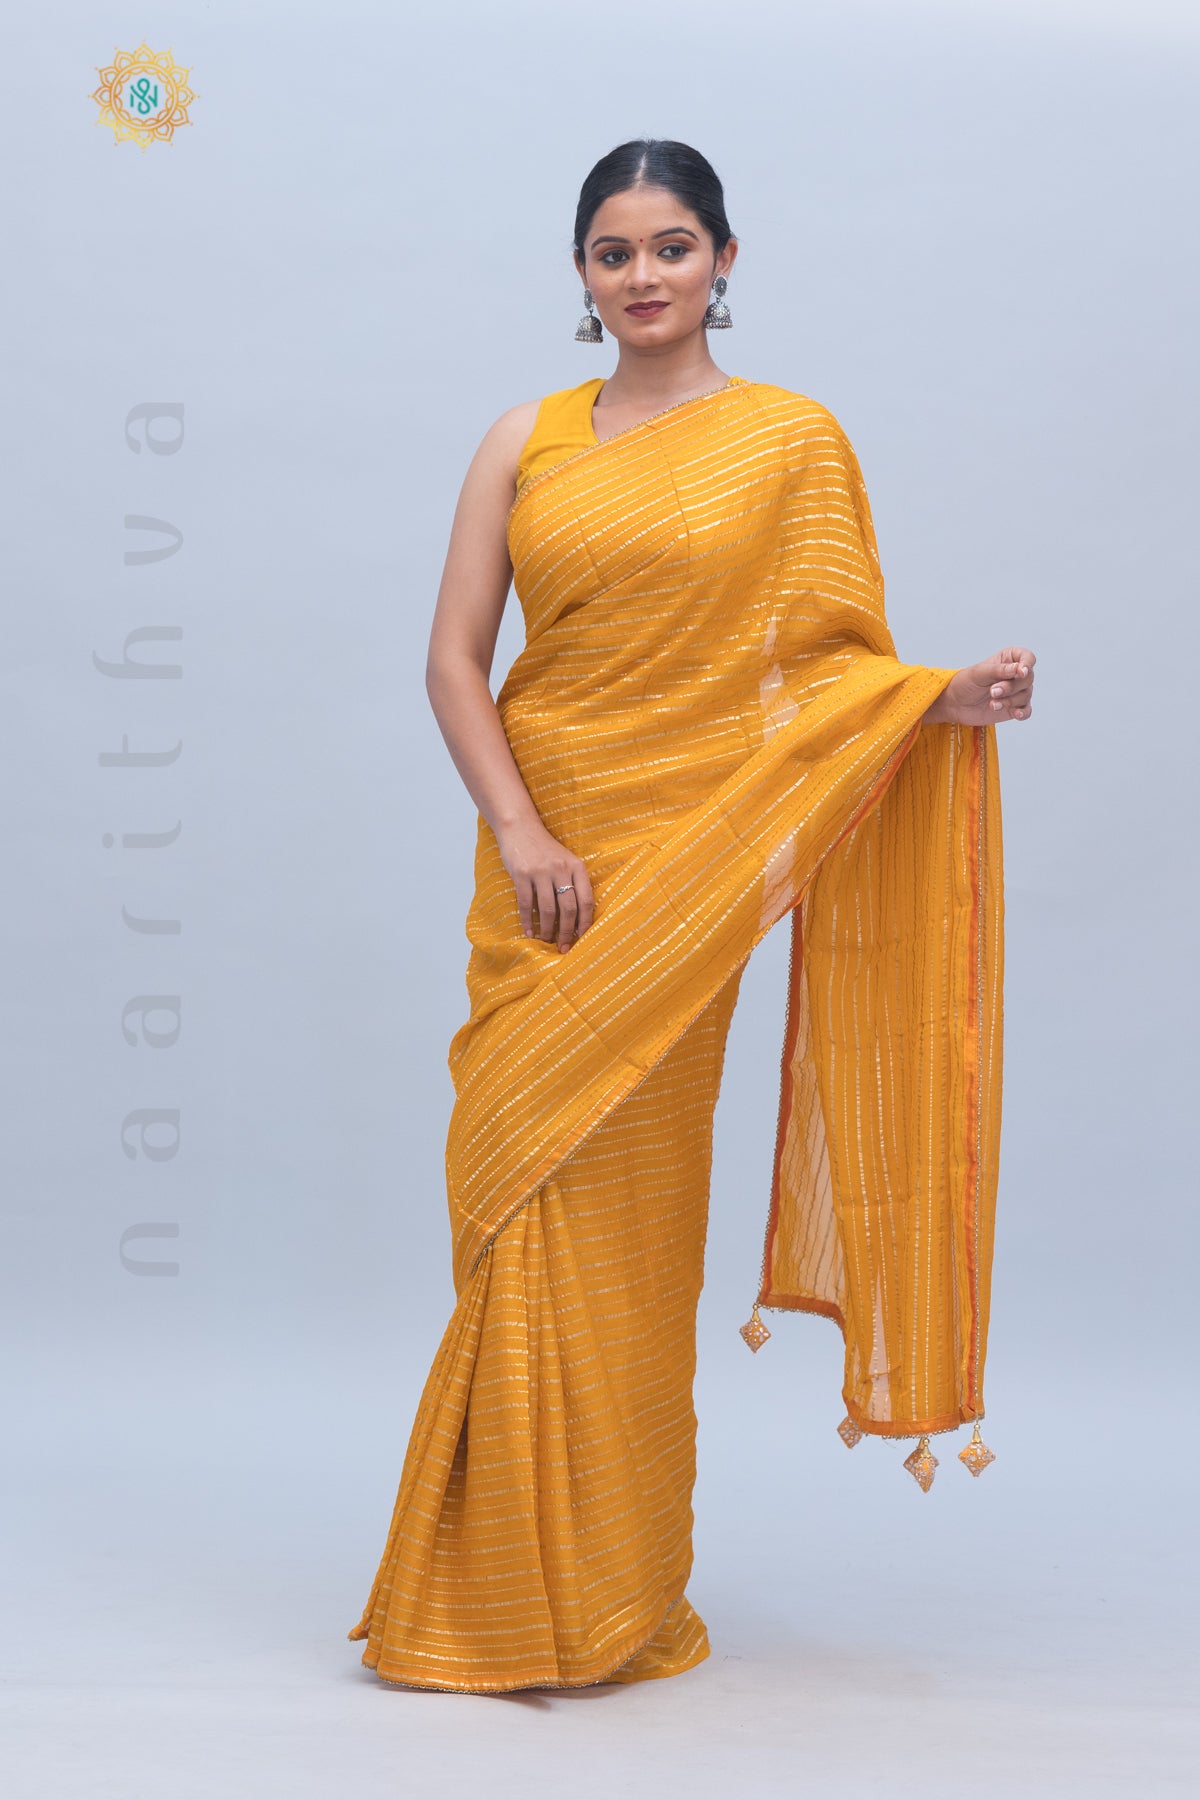 YELLOW - ORGANZA GEORGETTE WITH ZARI STRIPES, PIPE BEADS BORDER & BROCADE BLOUSE